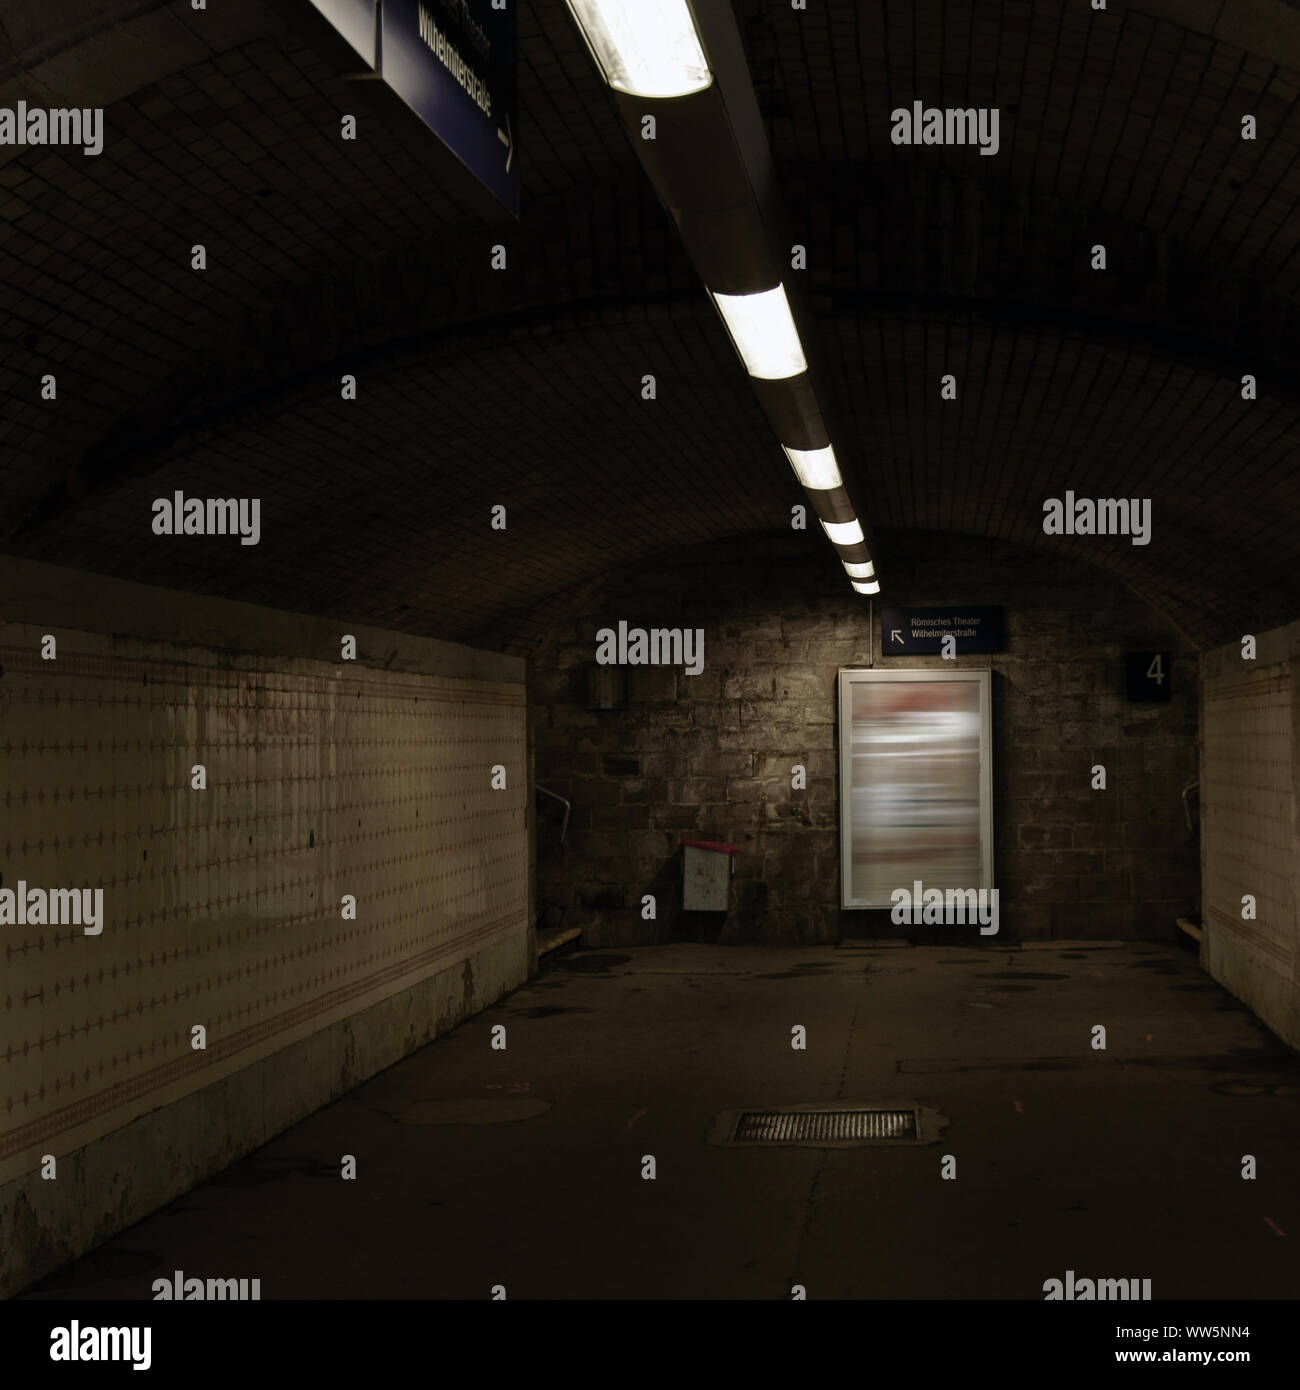 Dark railway station tunnel with artificial light and poster frame, Stock Photo